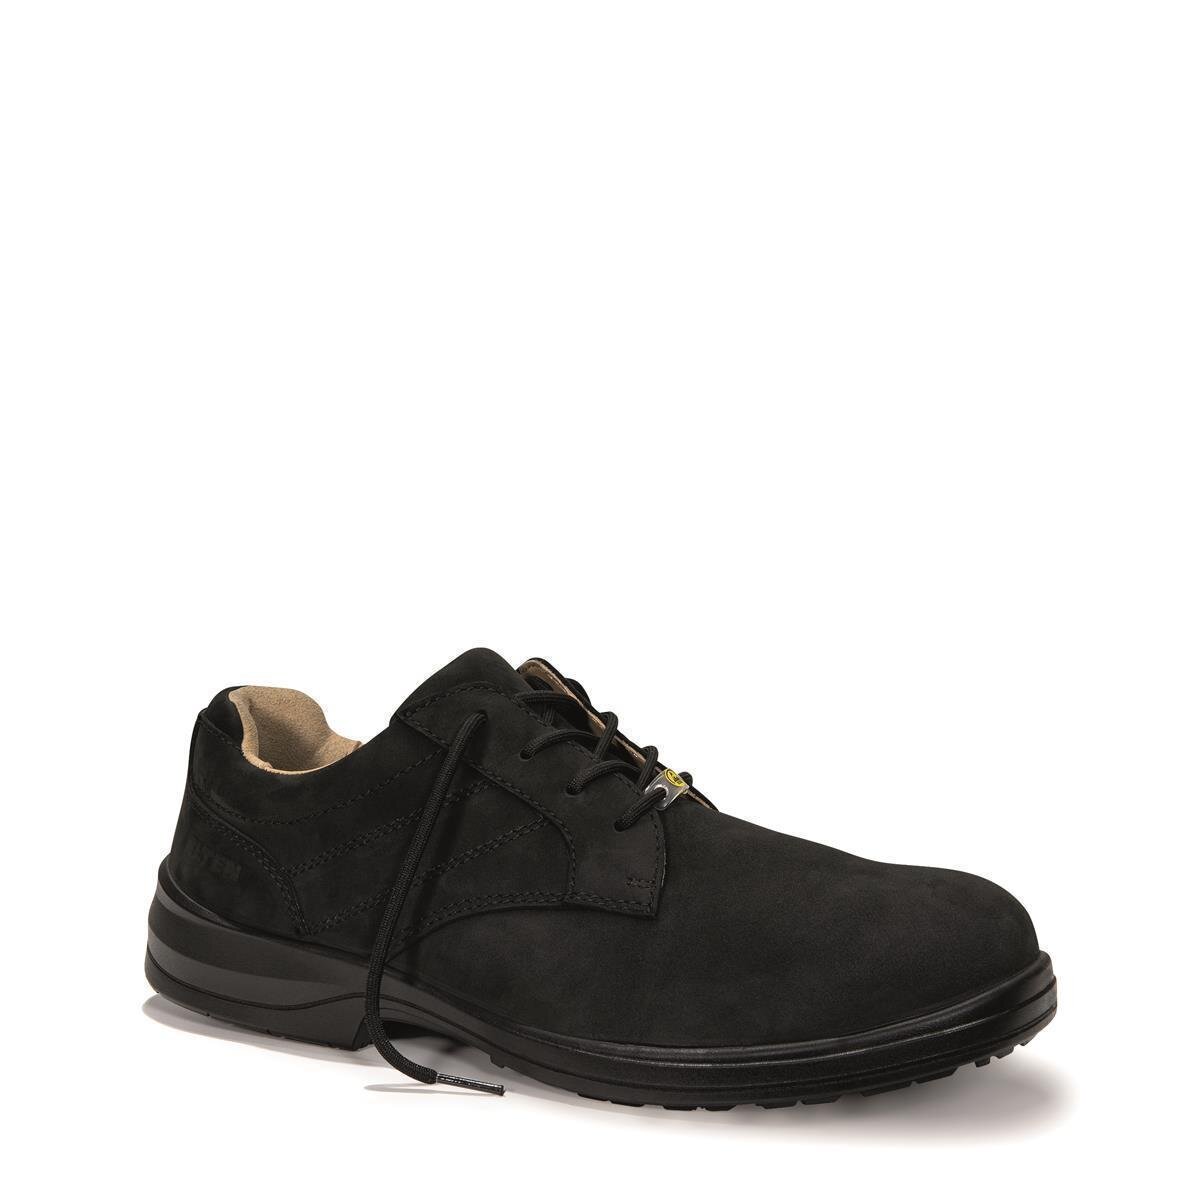 ELTEN MANAGER XXB Low 42 S3 Gr. € (723231-42), ESD 112,35